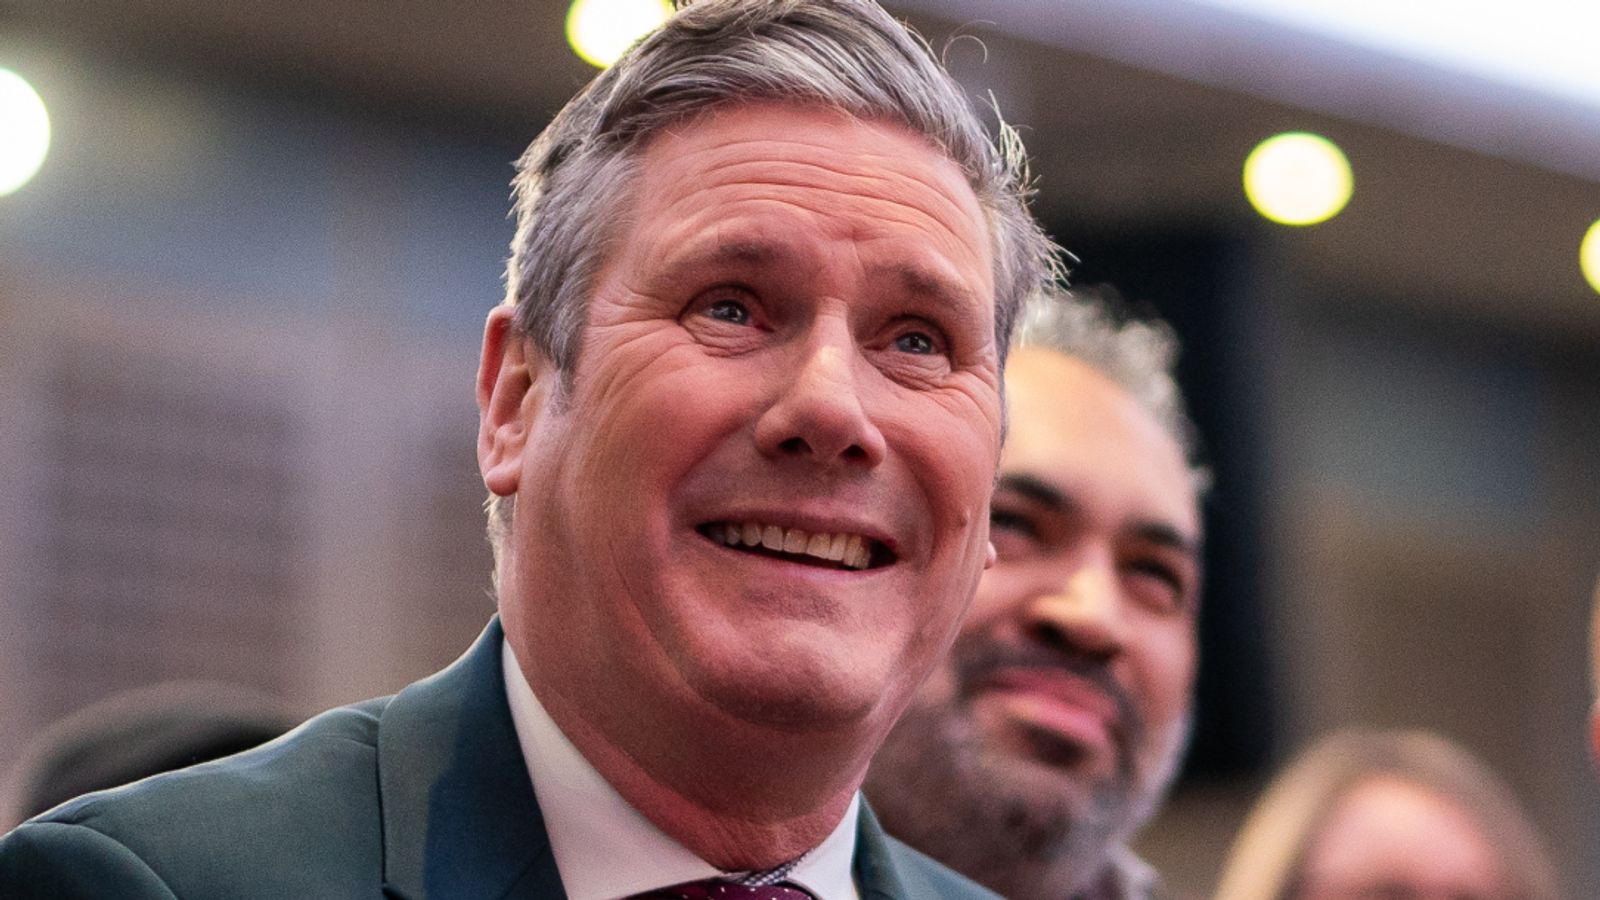 Starmer’s ‘radical’ promises have gone as he targets power – but we still don’t really know who he is